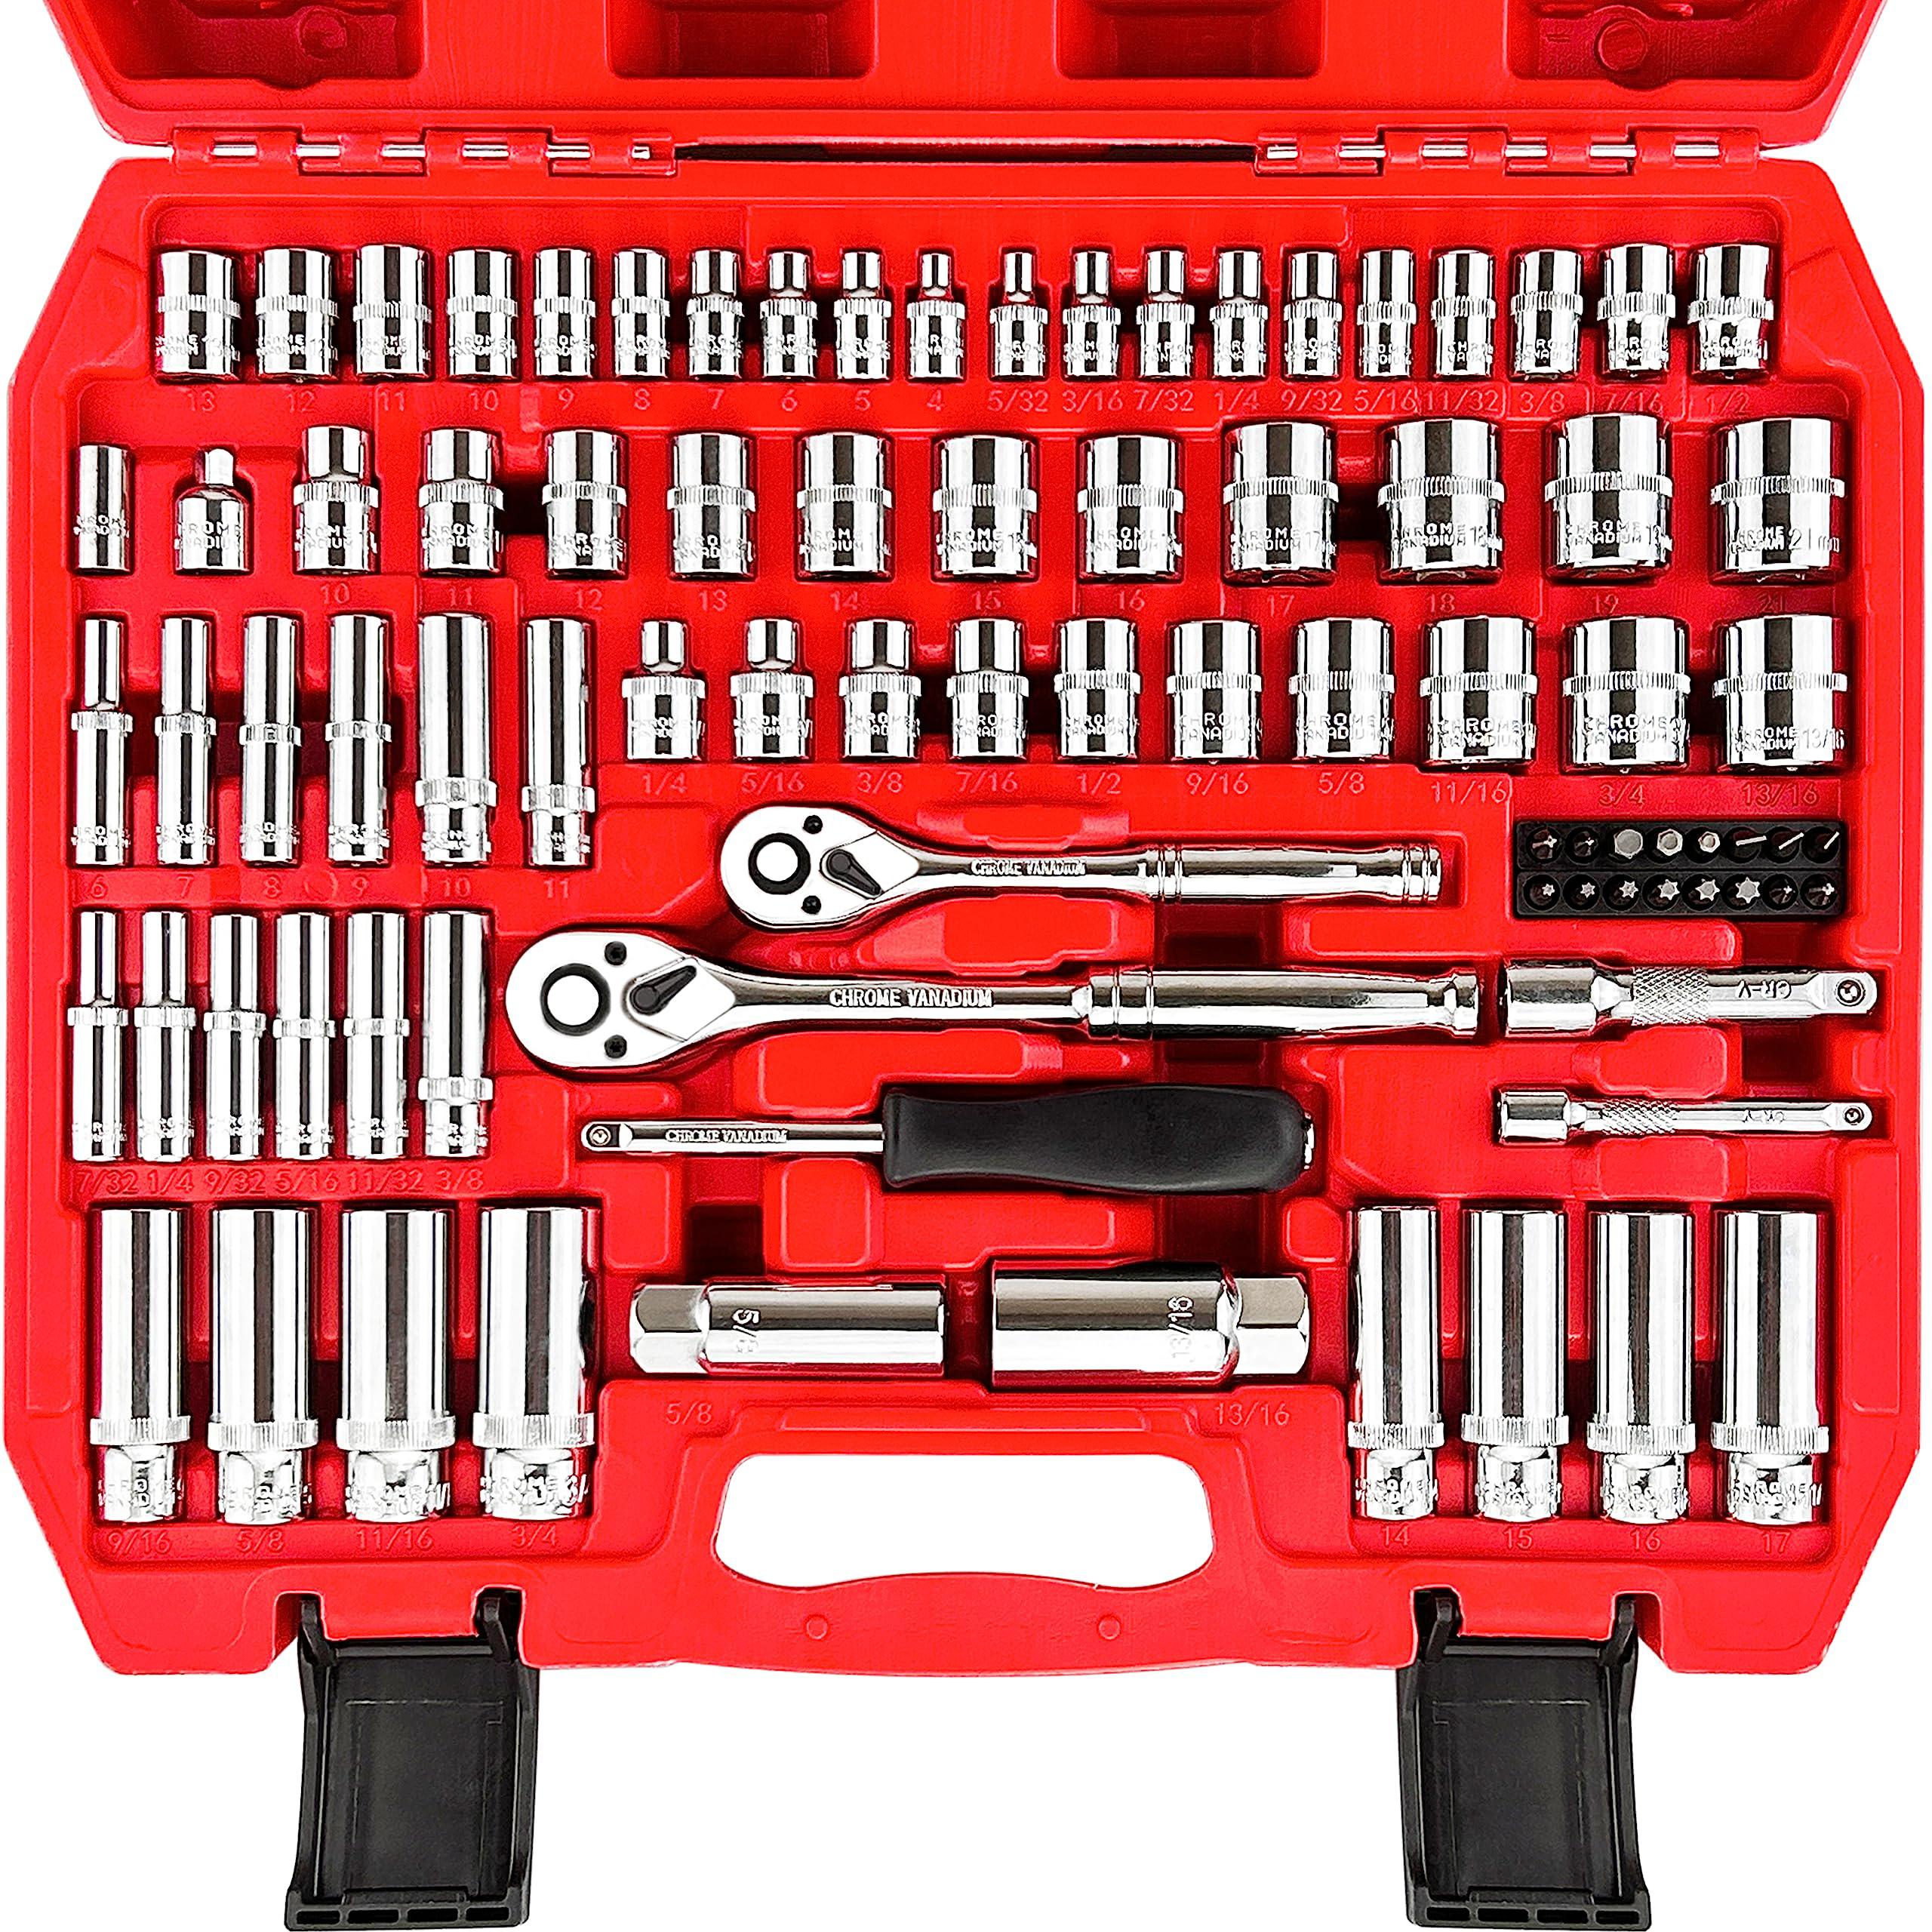 wett 1/4" and 3/8" drive socket set, 86-piece socket wrench set with quick-release ratchet, extention bar, adapter, 1/4" bits